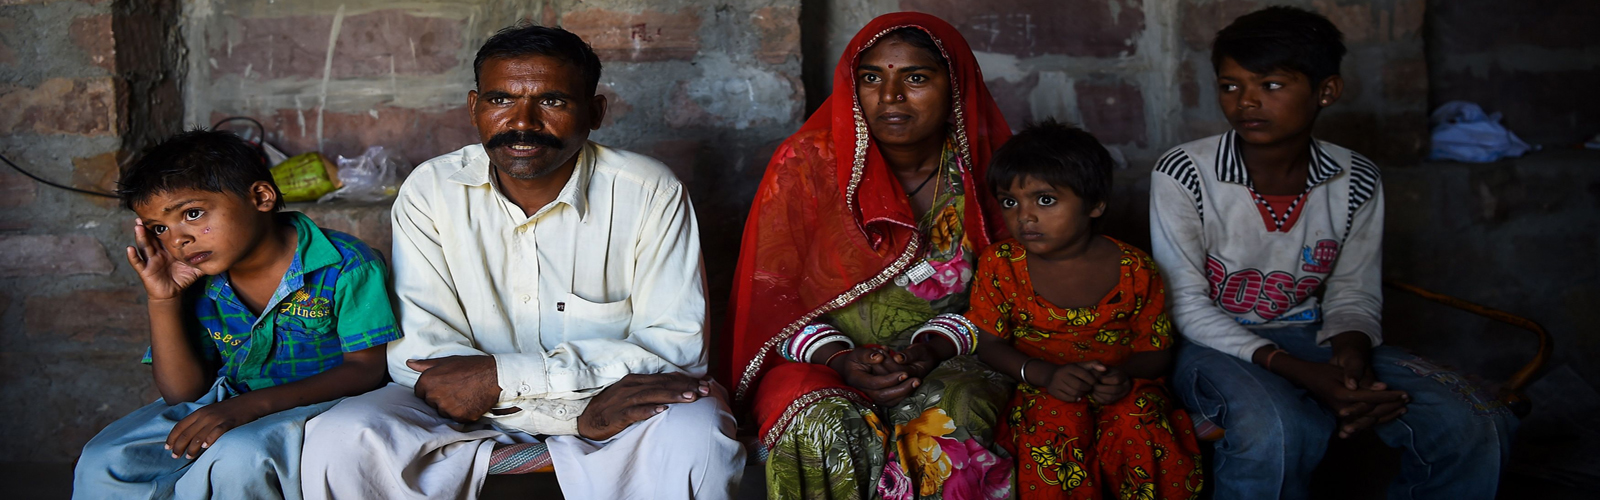 ´Partition is not over´: Pakistani Hindus find little refuge in India